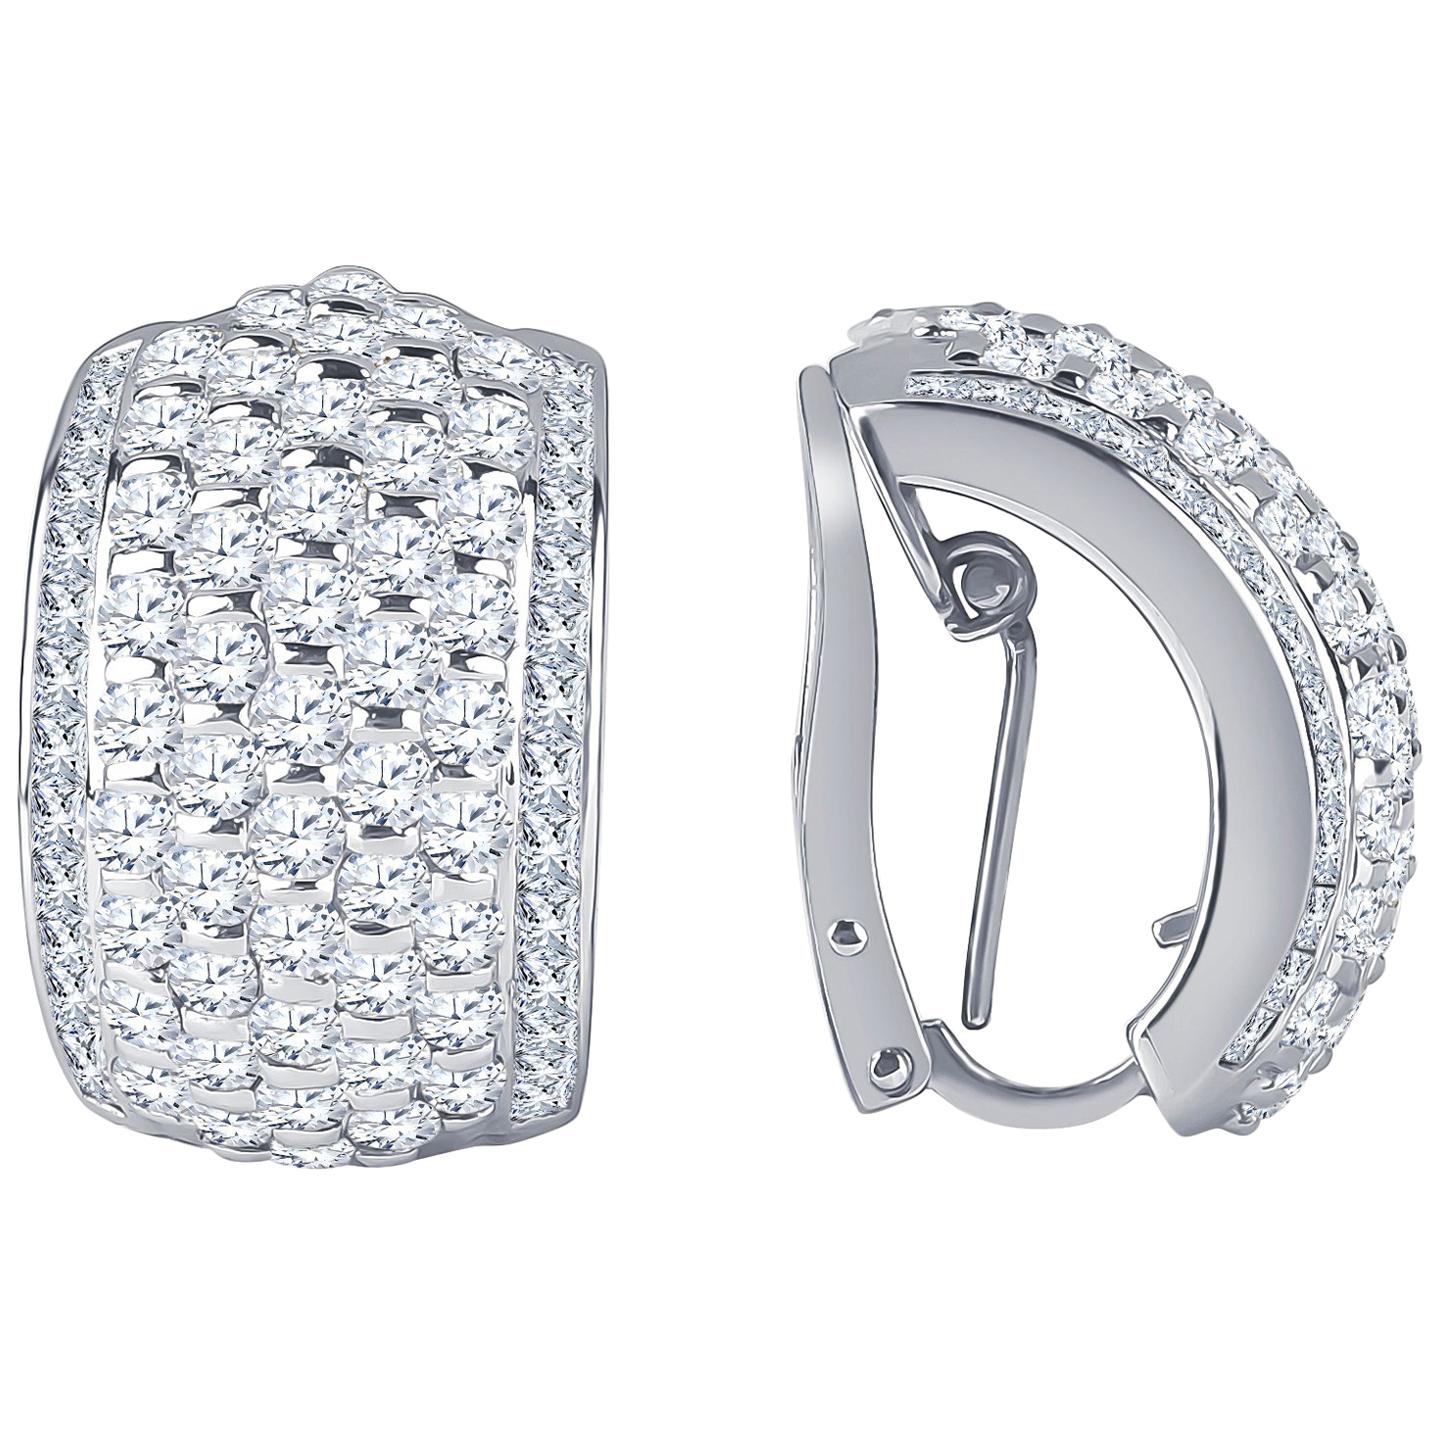 3.50 Carat Total Weight of Fine Round Diamonds in Platinum Earrings